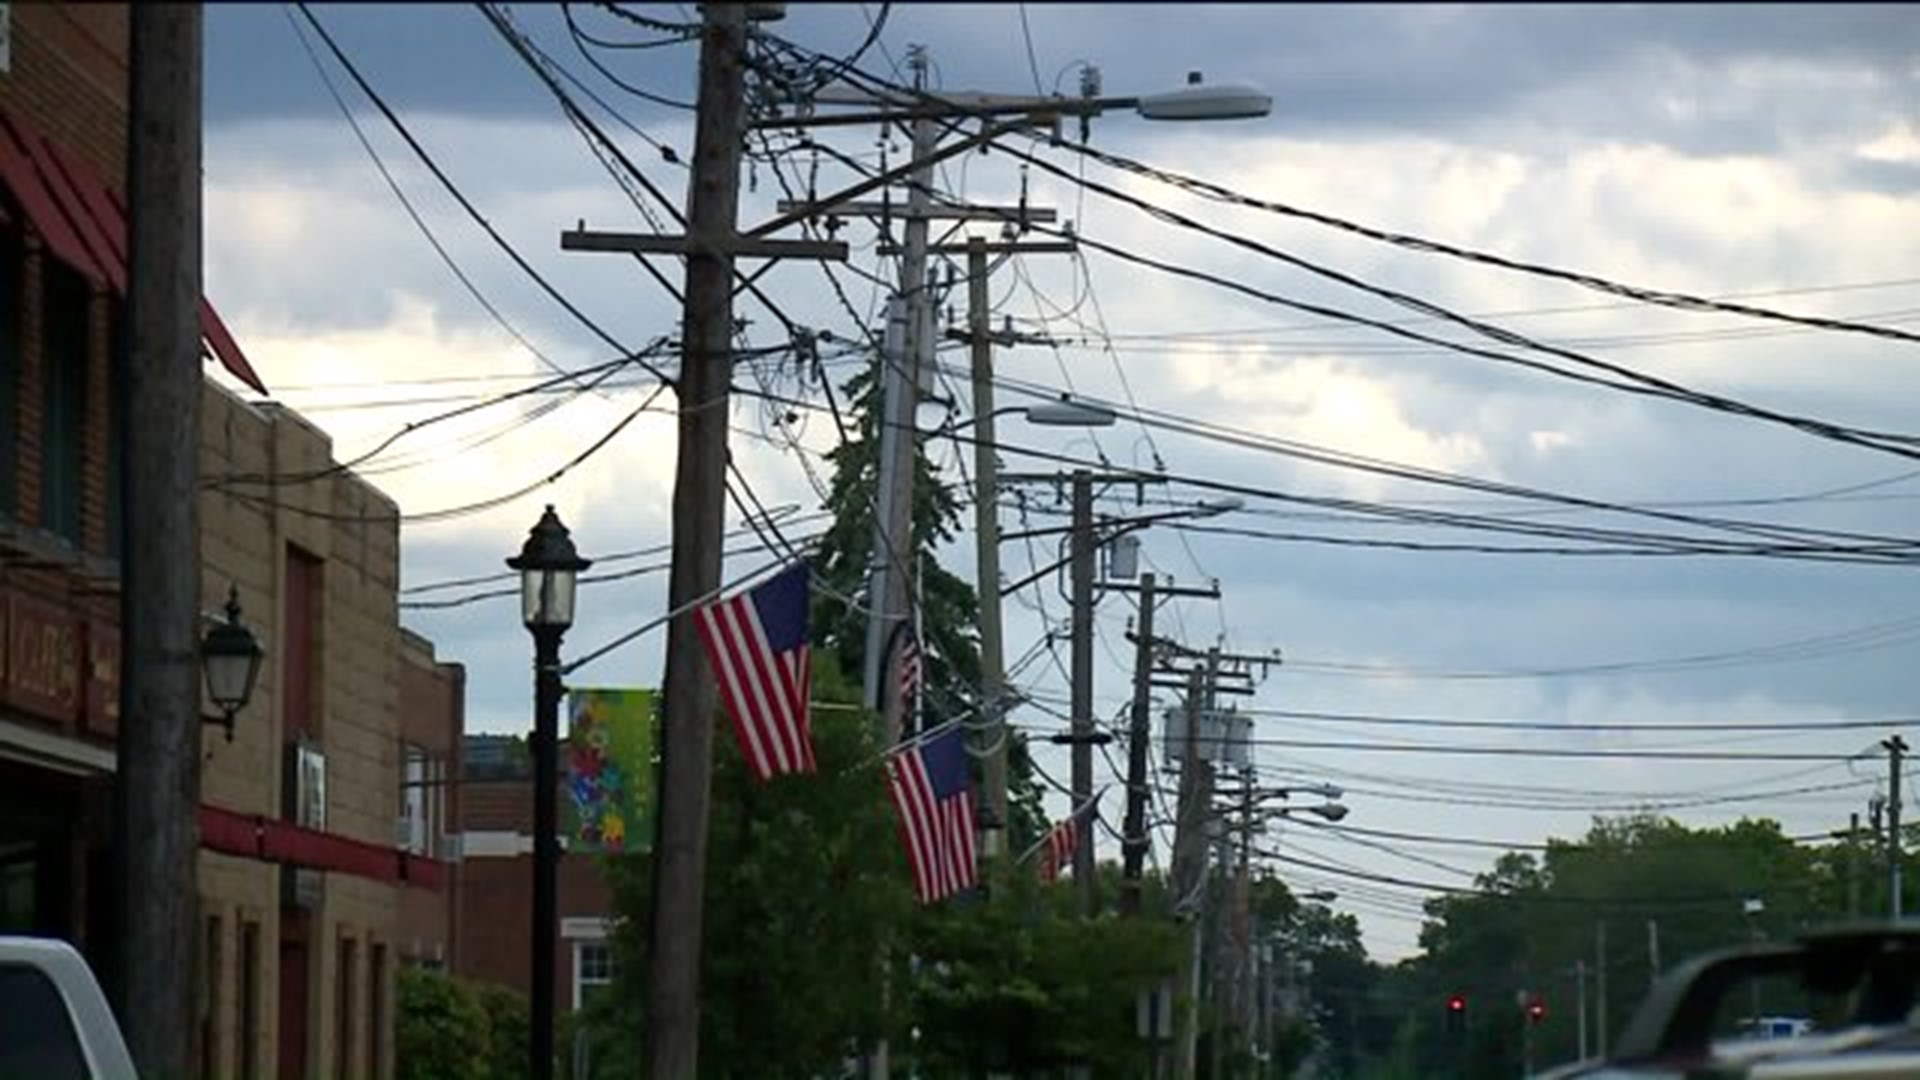 Wi-Fi and sci-fi collide in Plainville street lamps